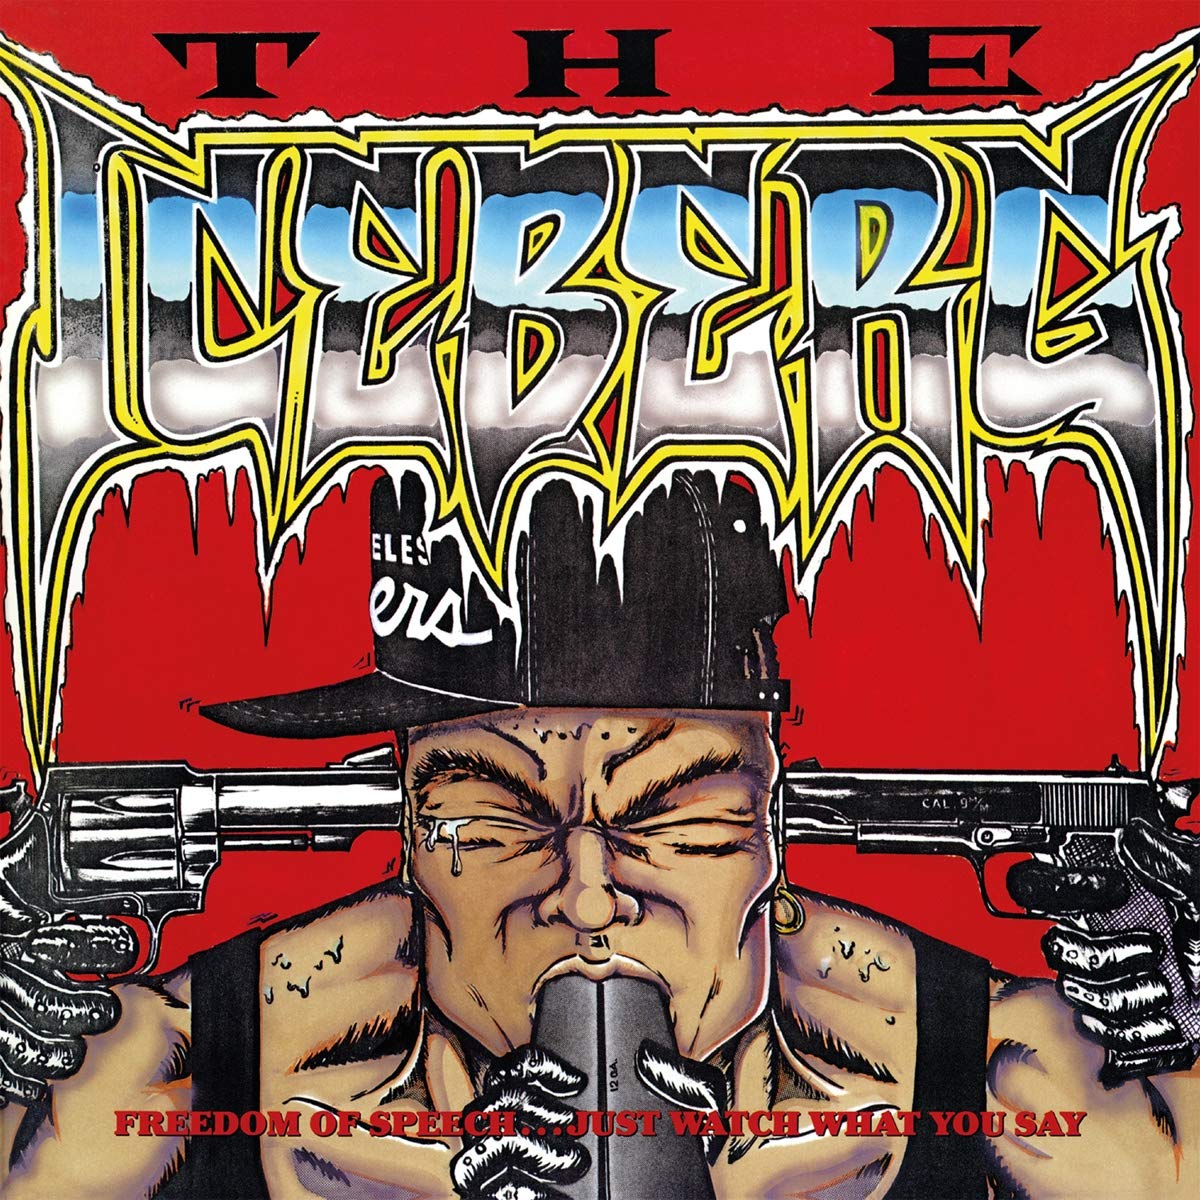 Ice-T - Iceberg / Freedom Of Speech Just Watch What You Say [Import] [Red Vinyl]